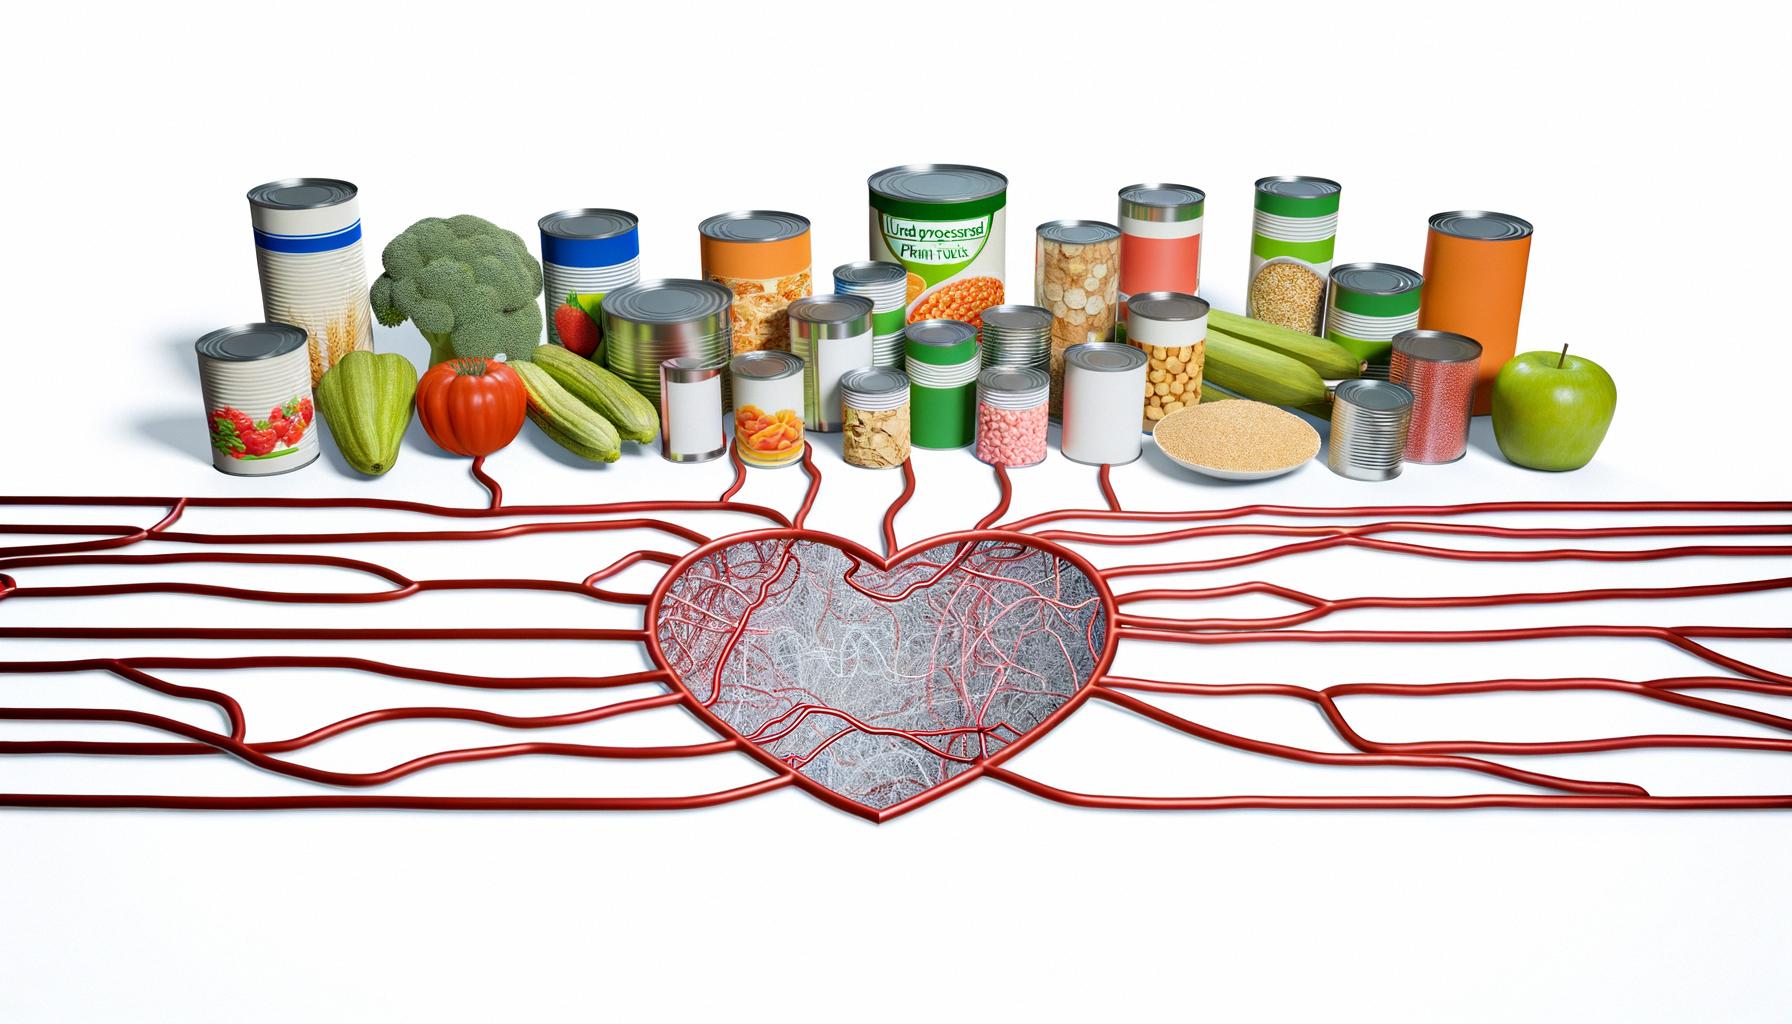 Ultra-processed plant-based foods increase cardiovascular risk and new statin prescription models emerge.